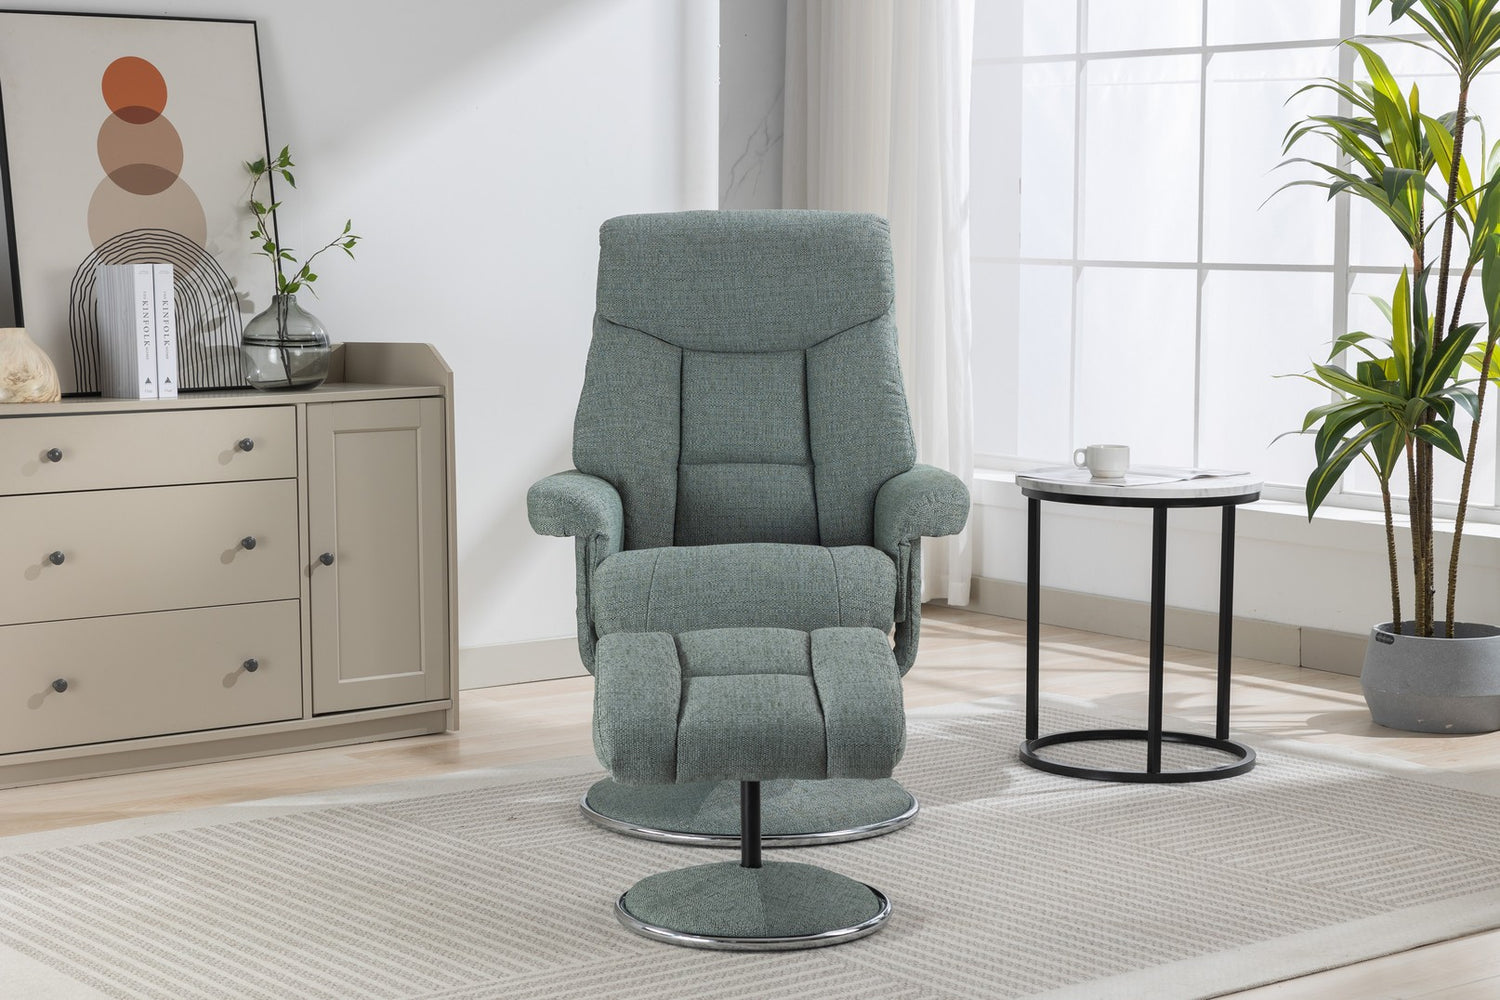 GFA Biarritz Recliner And Foot Stool Lisbon Teal-Better Bed Company